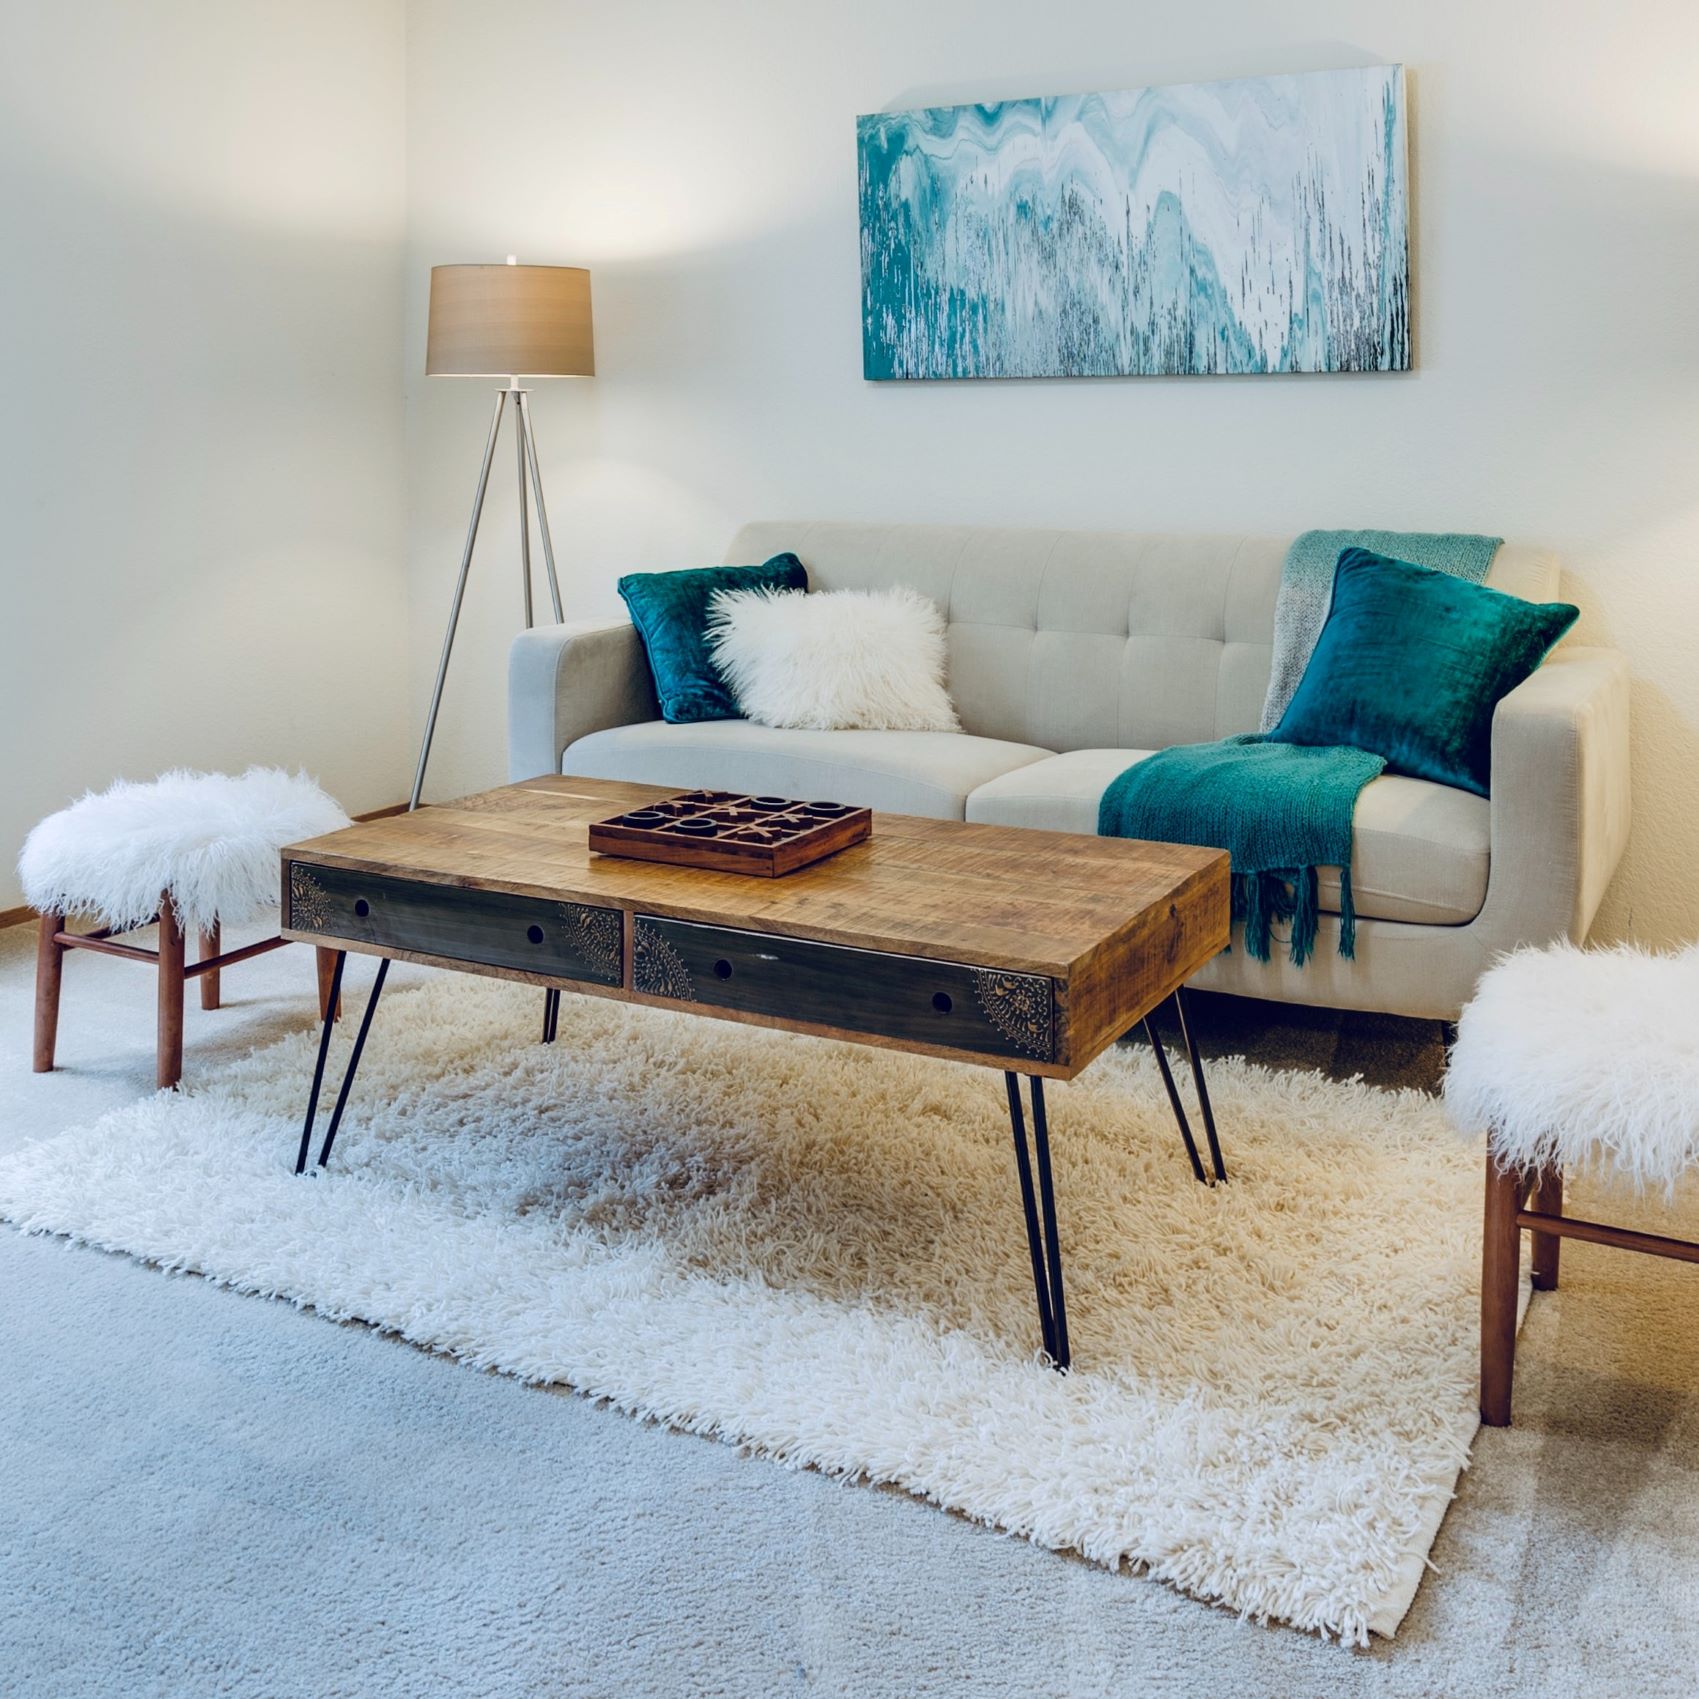 Home staging tips and trends for 2022.